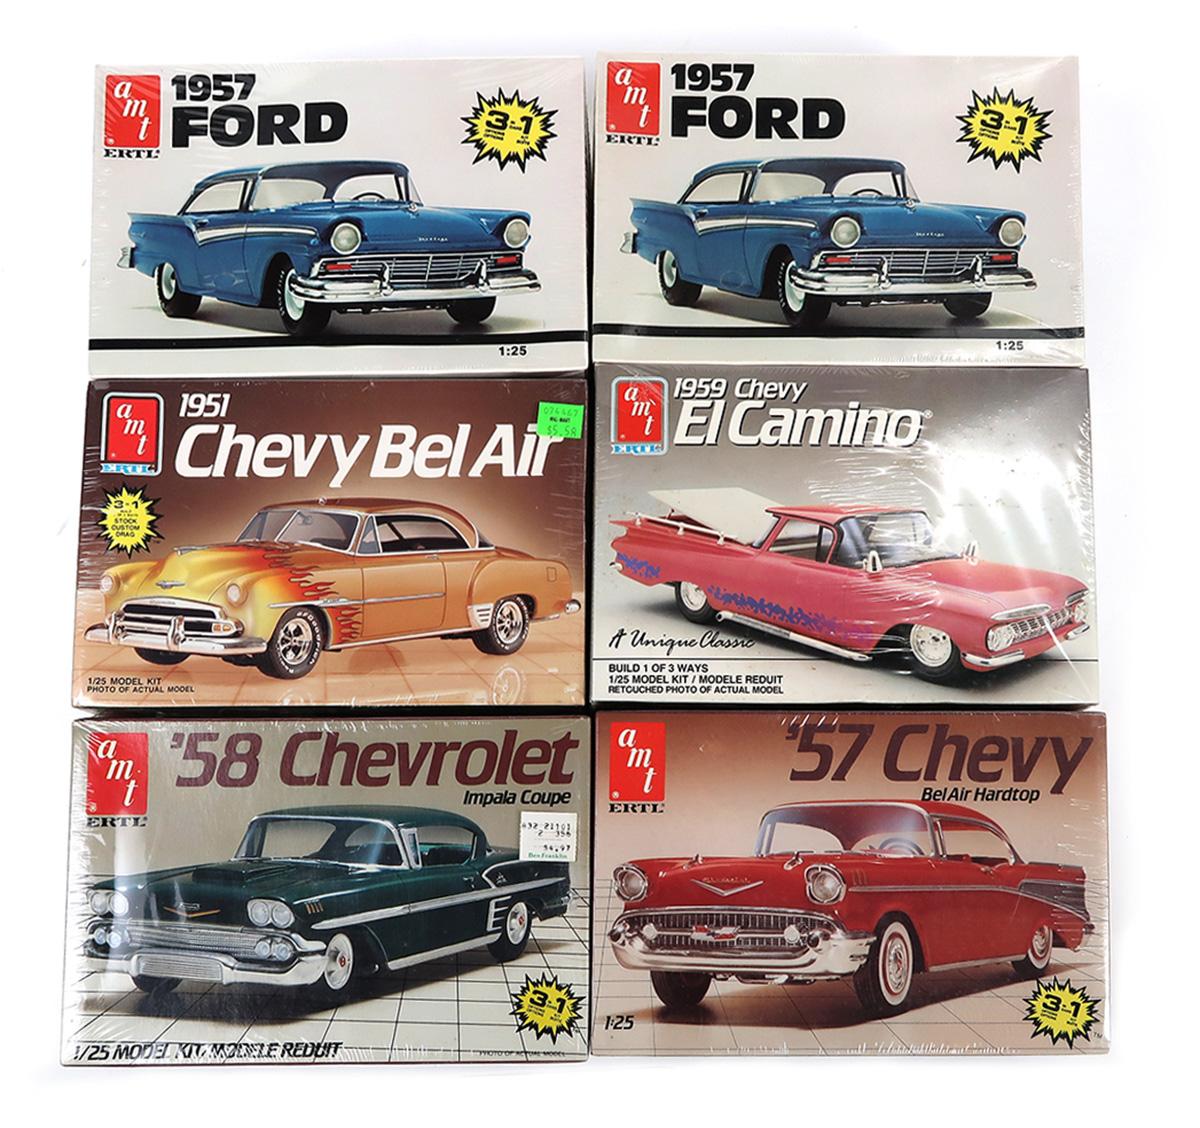 Toy Scale Models (6), Ertl, 1957 Ford (2), 1951 Chevy Bel Air, 1959 Chevy E